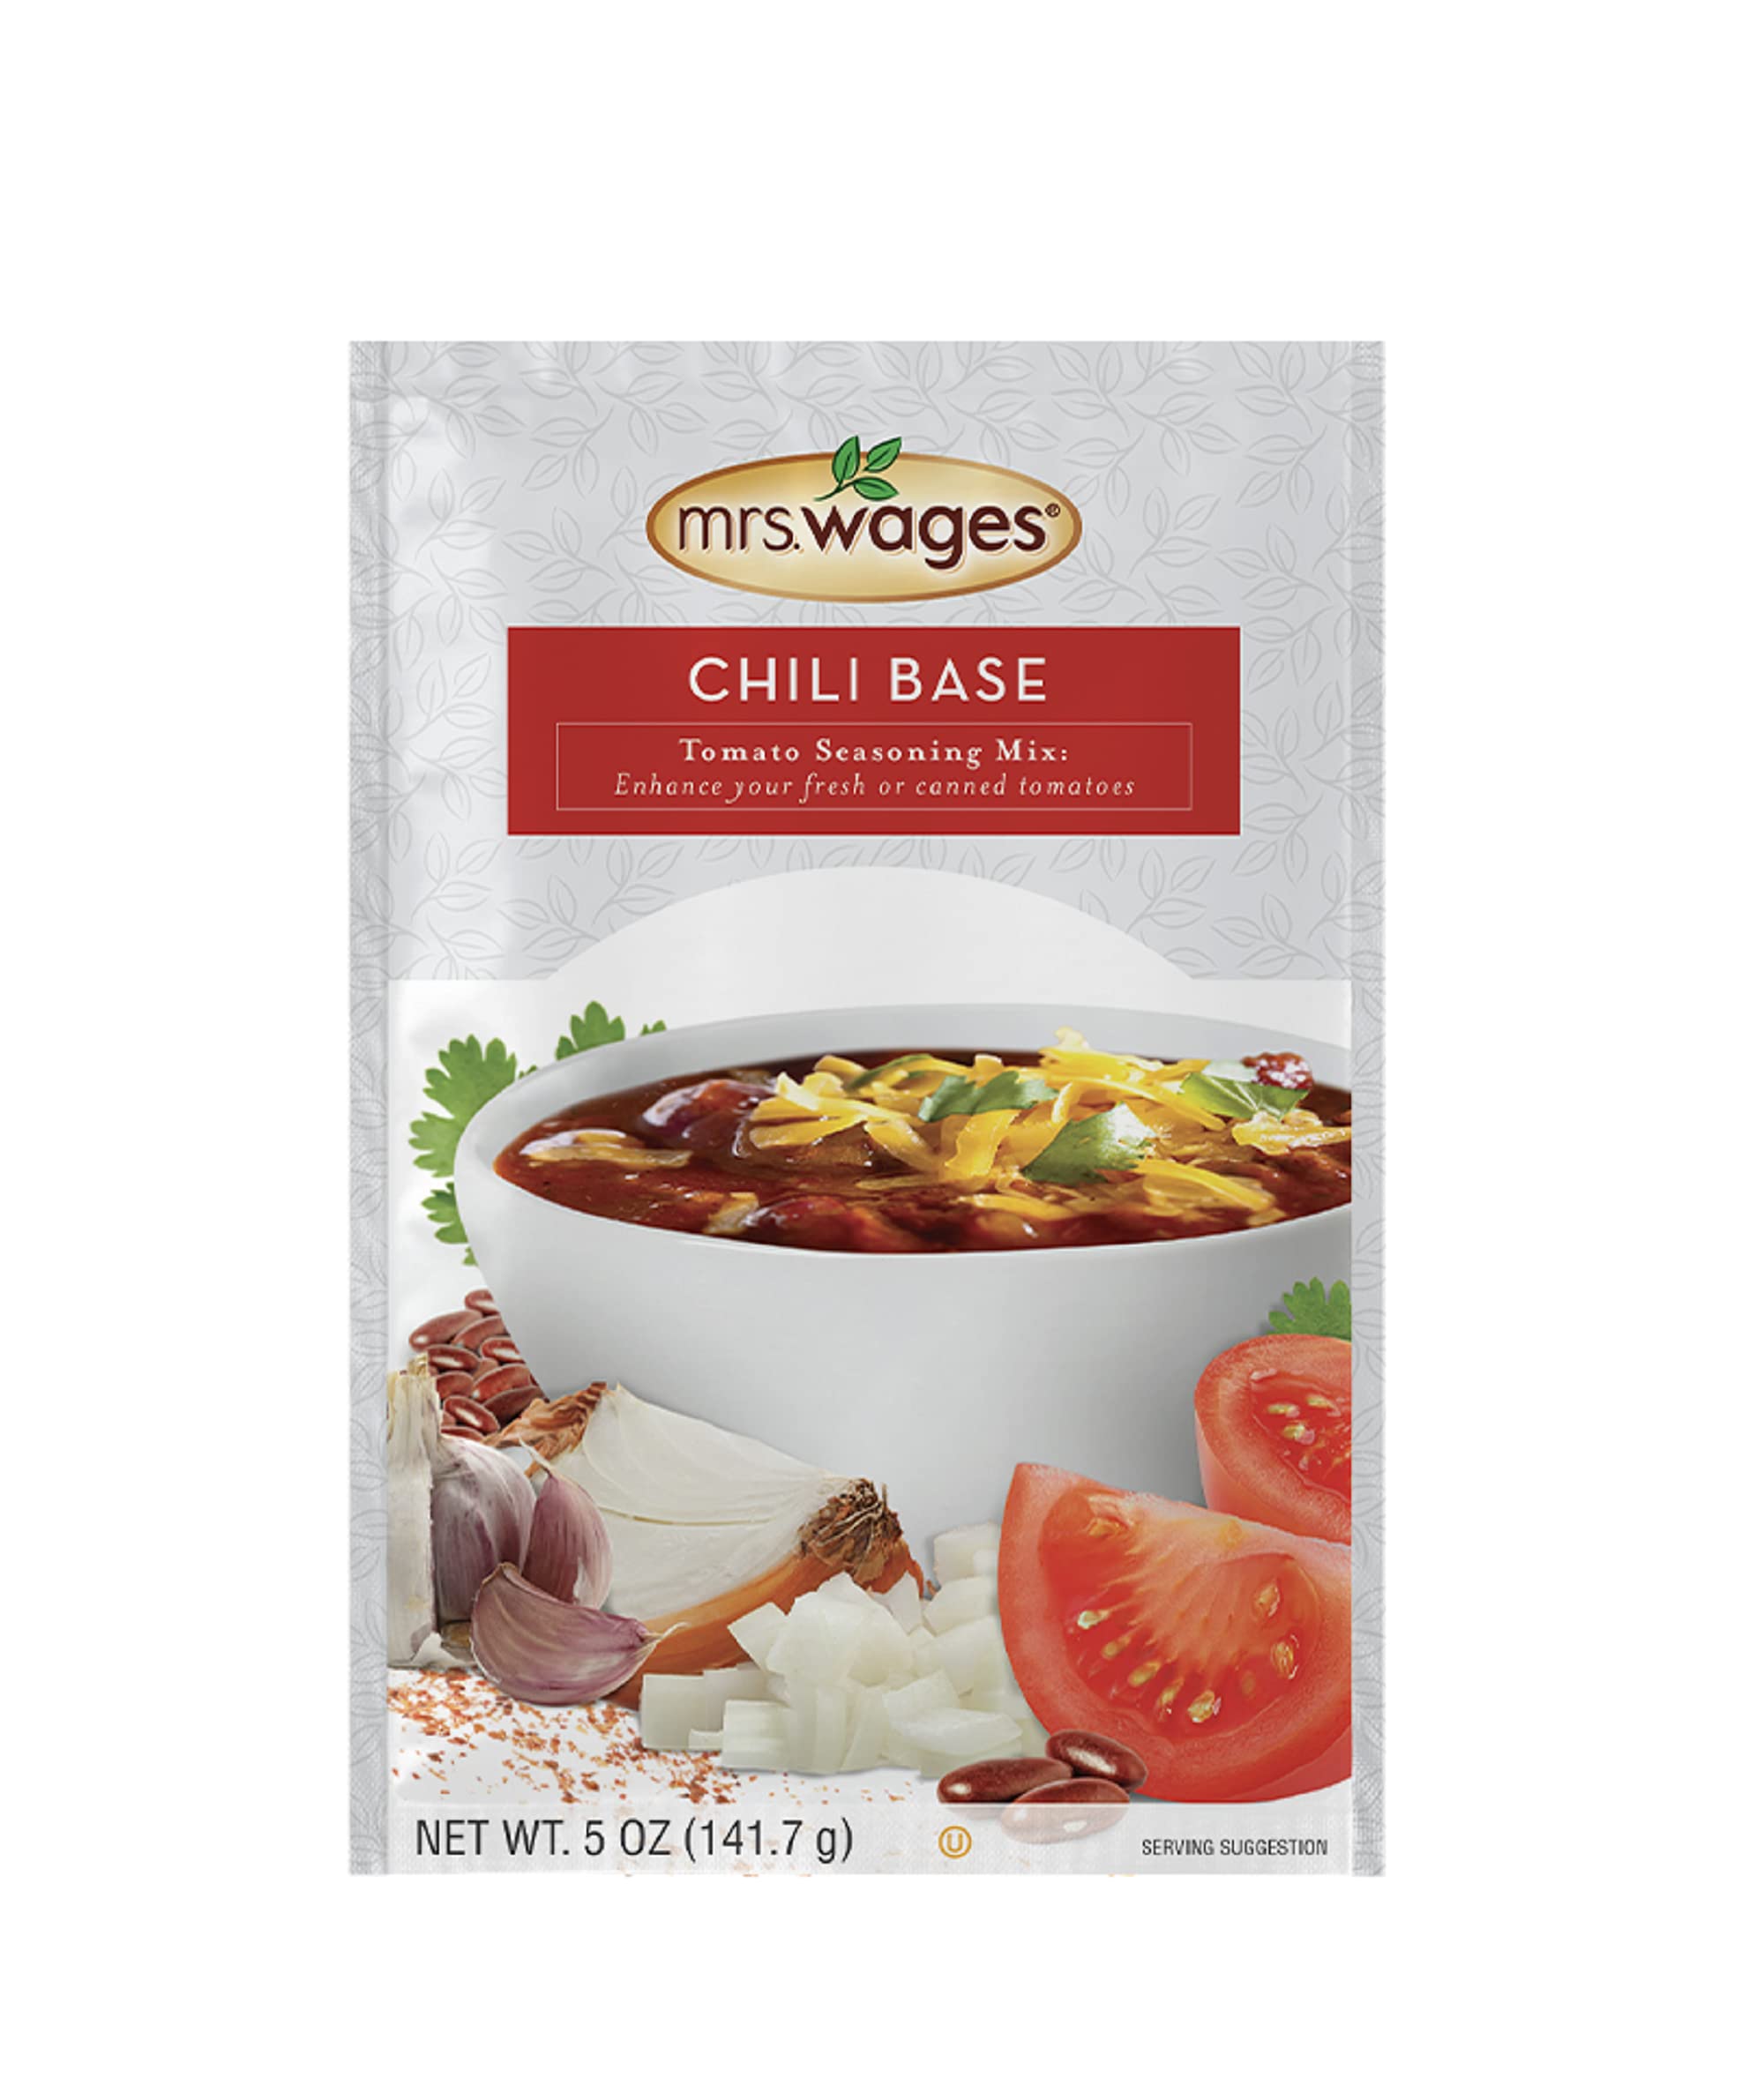 Mrs Wages Chili Base Canning Mix, 5 Oz Package (VALUE PACK of 6)